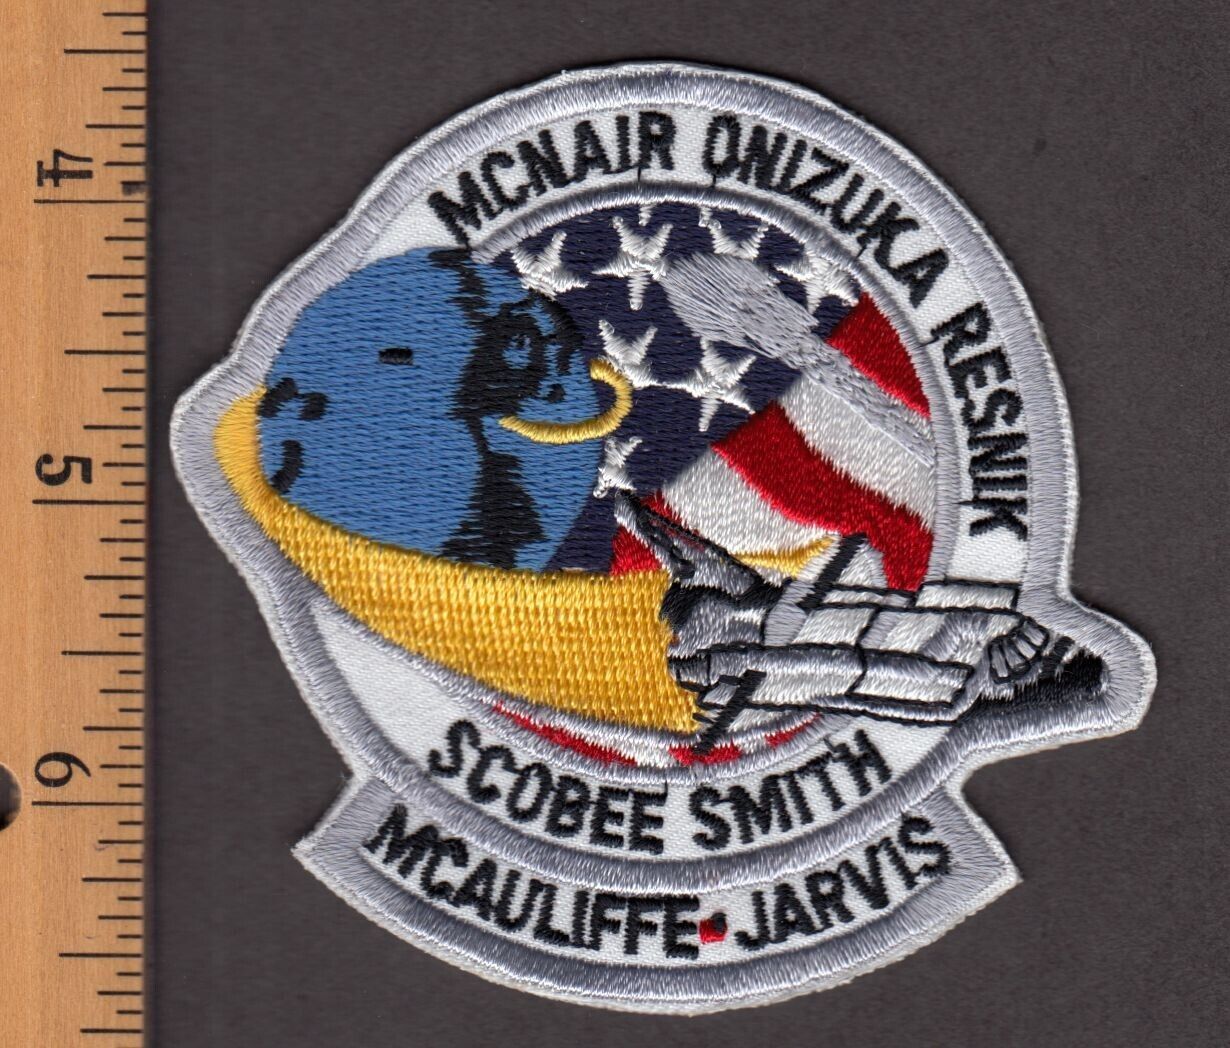 1986 Shuttle Challenger STS-51-L embroidered patch McAuliffe Resnik McNair (A17